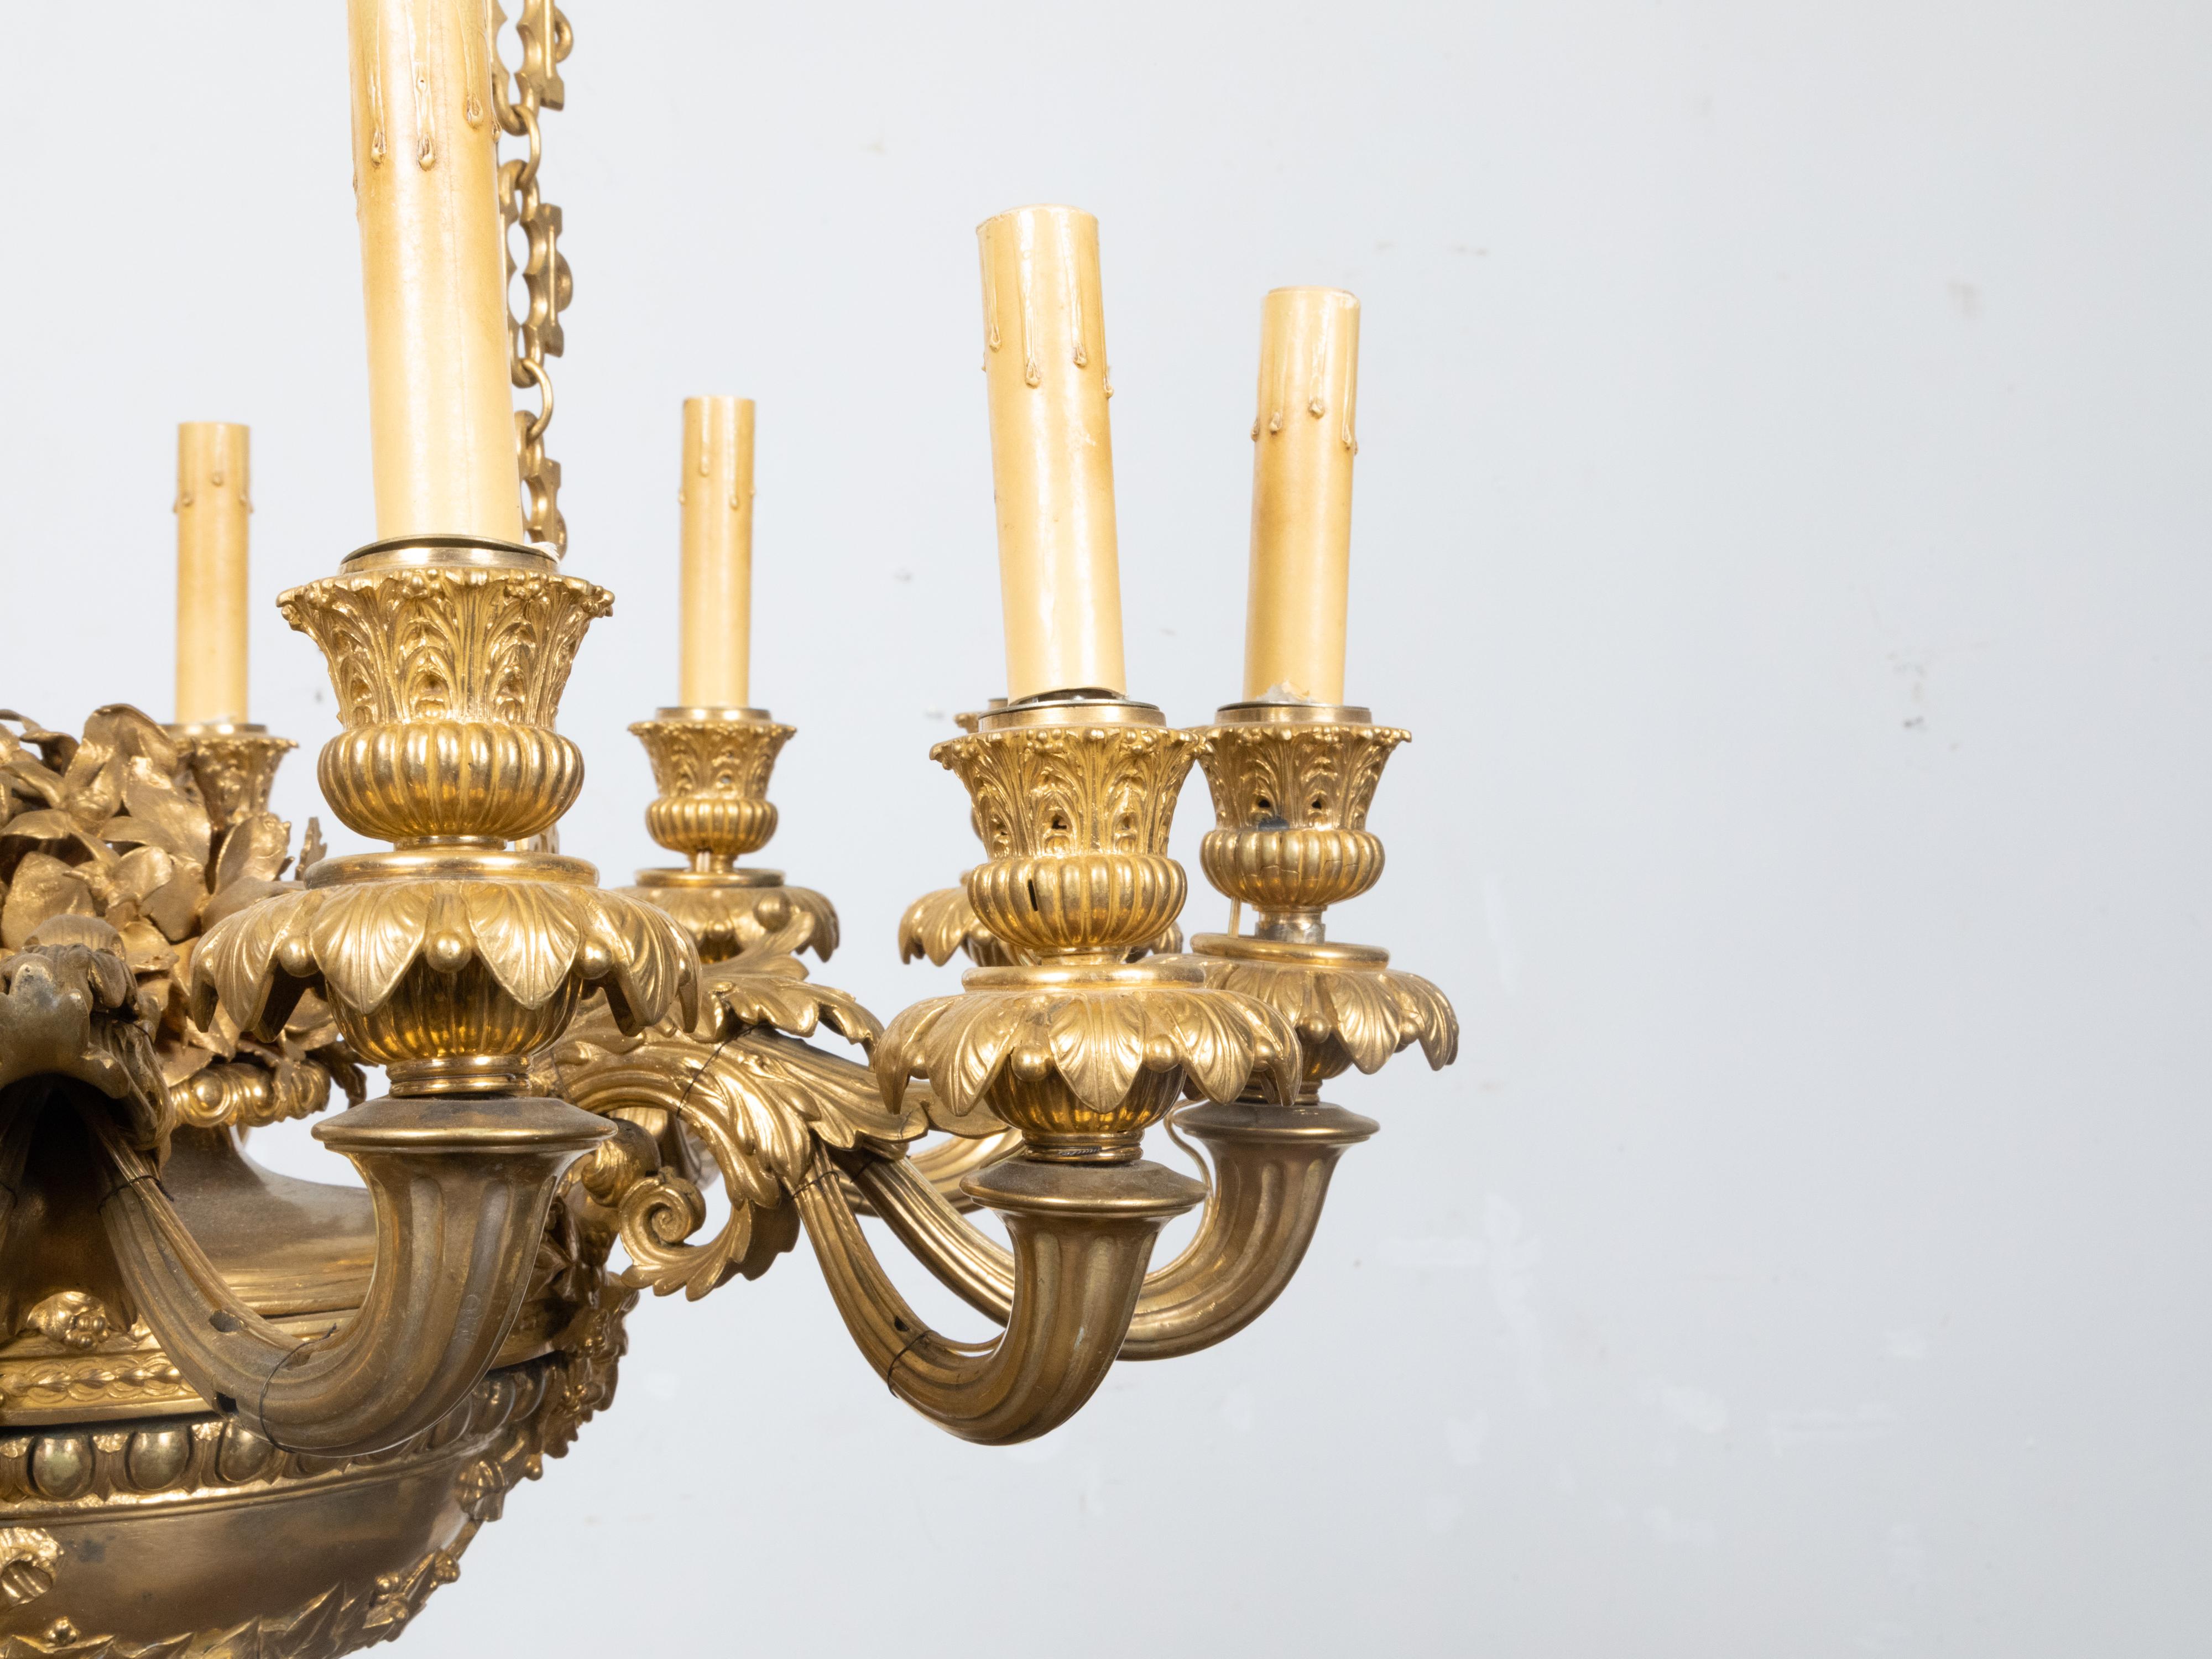 French Napoléon III 19th Century Gilt Bronze 12 Light Chandelier with Mascarons For Sale 11